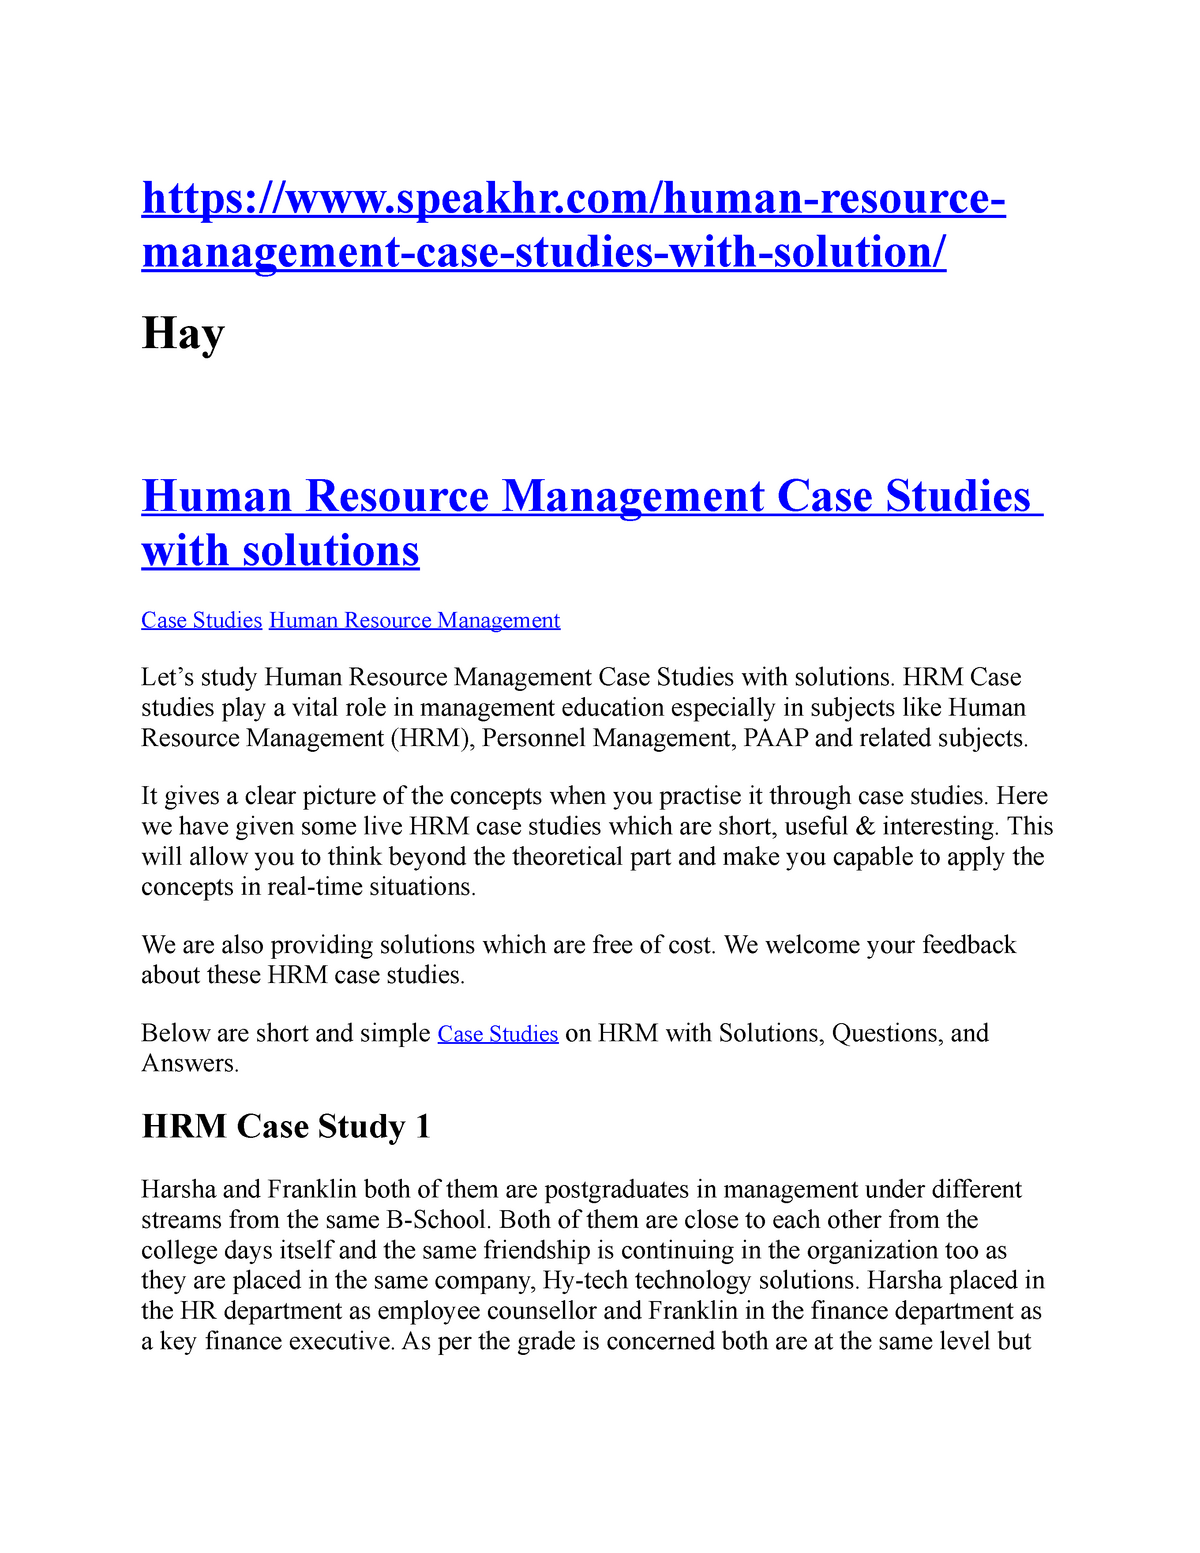 hrm case study with solution